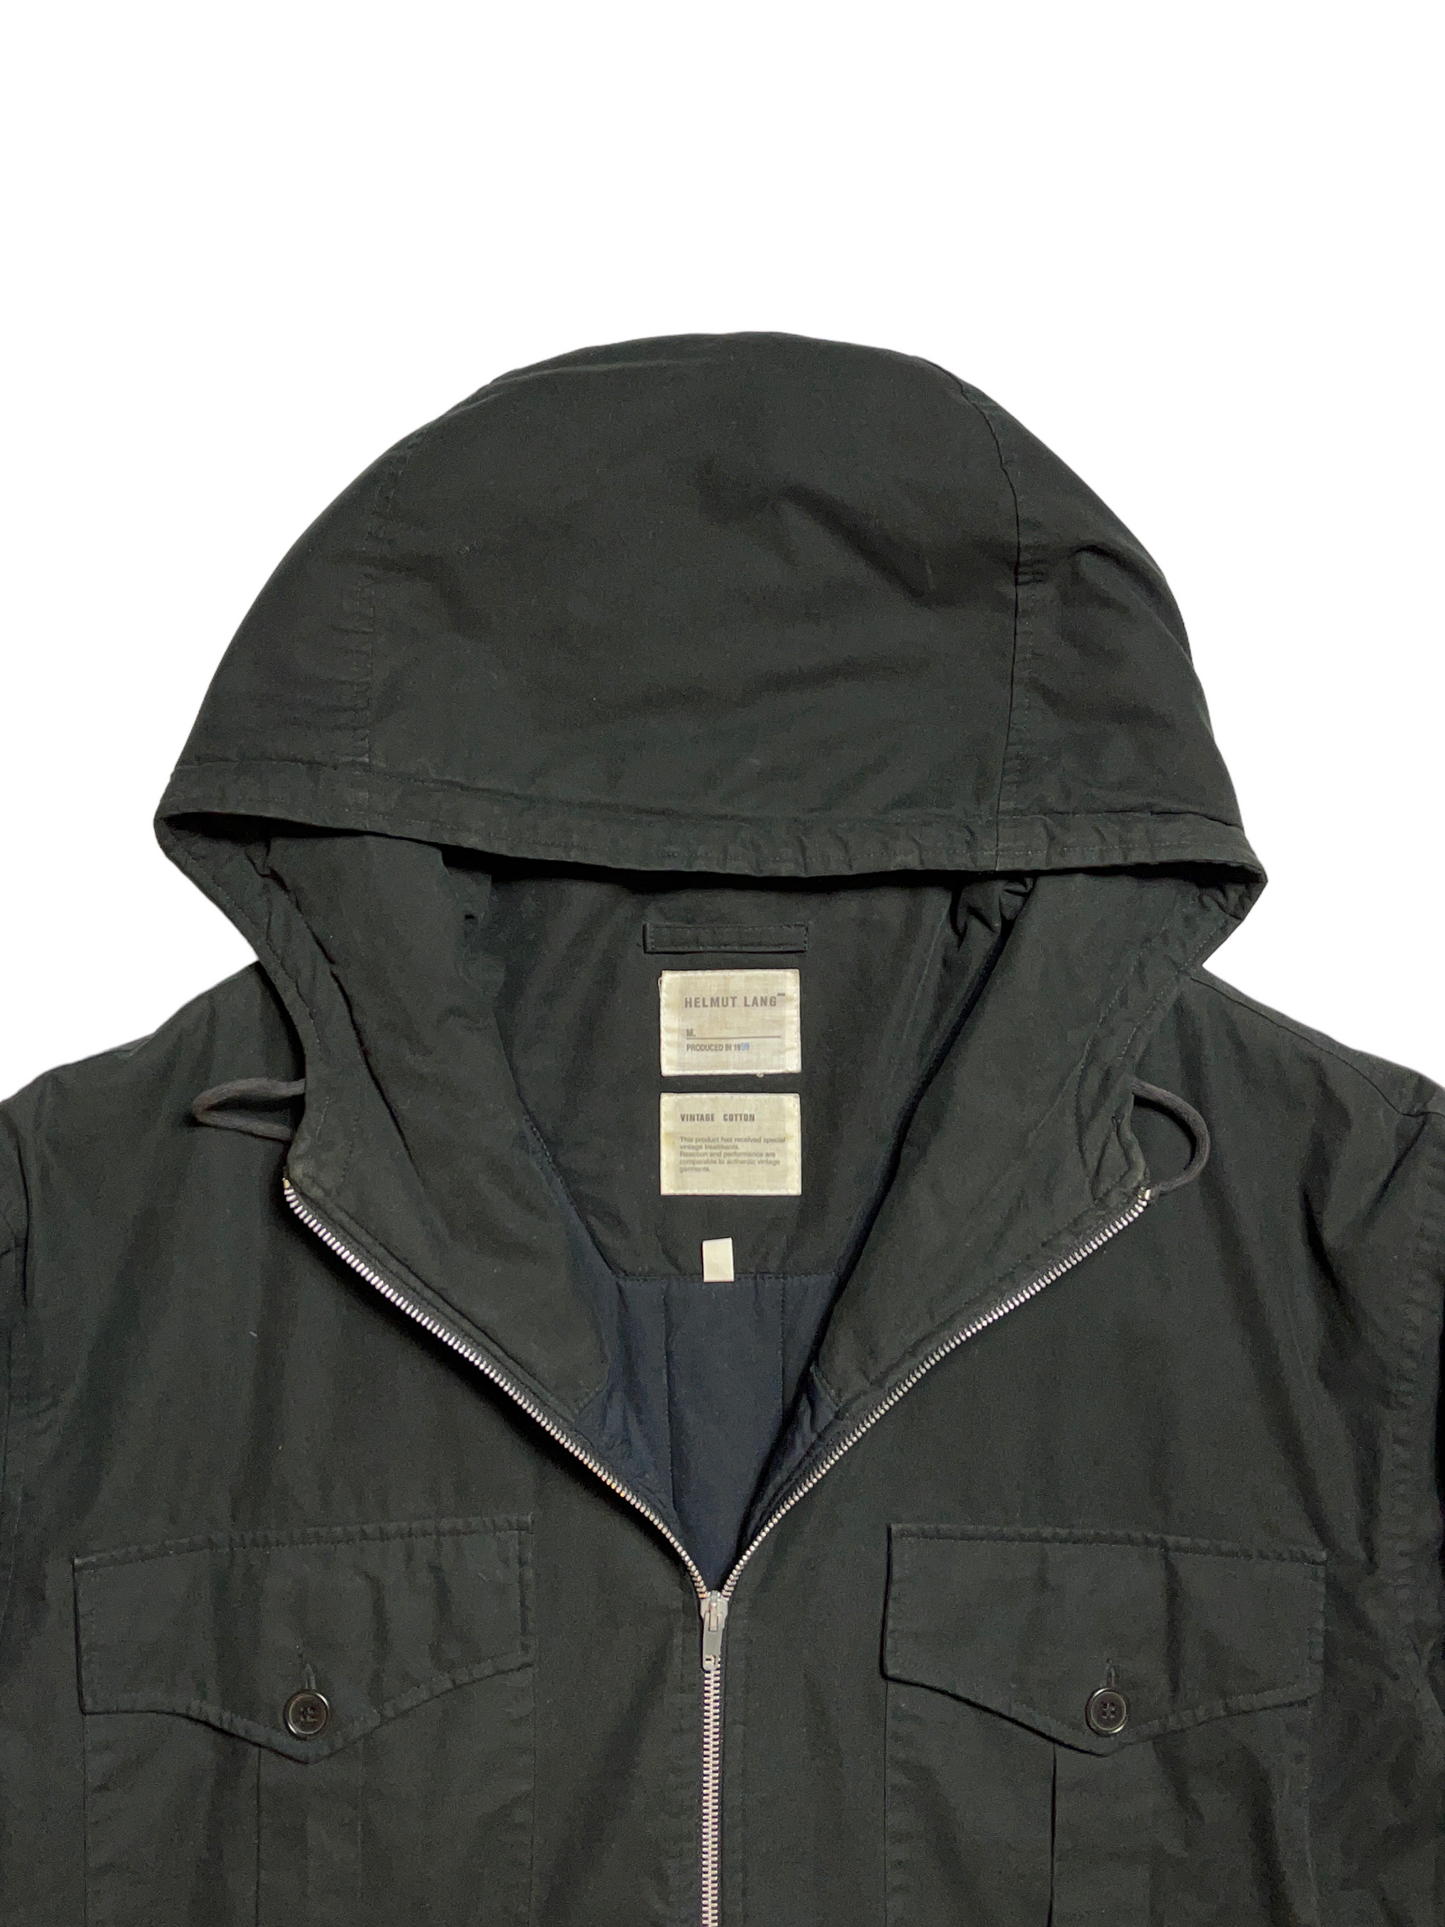 Helmut Lang FW99 Hooded Military Jacket